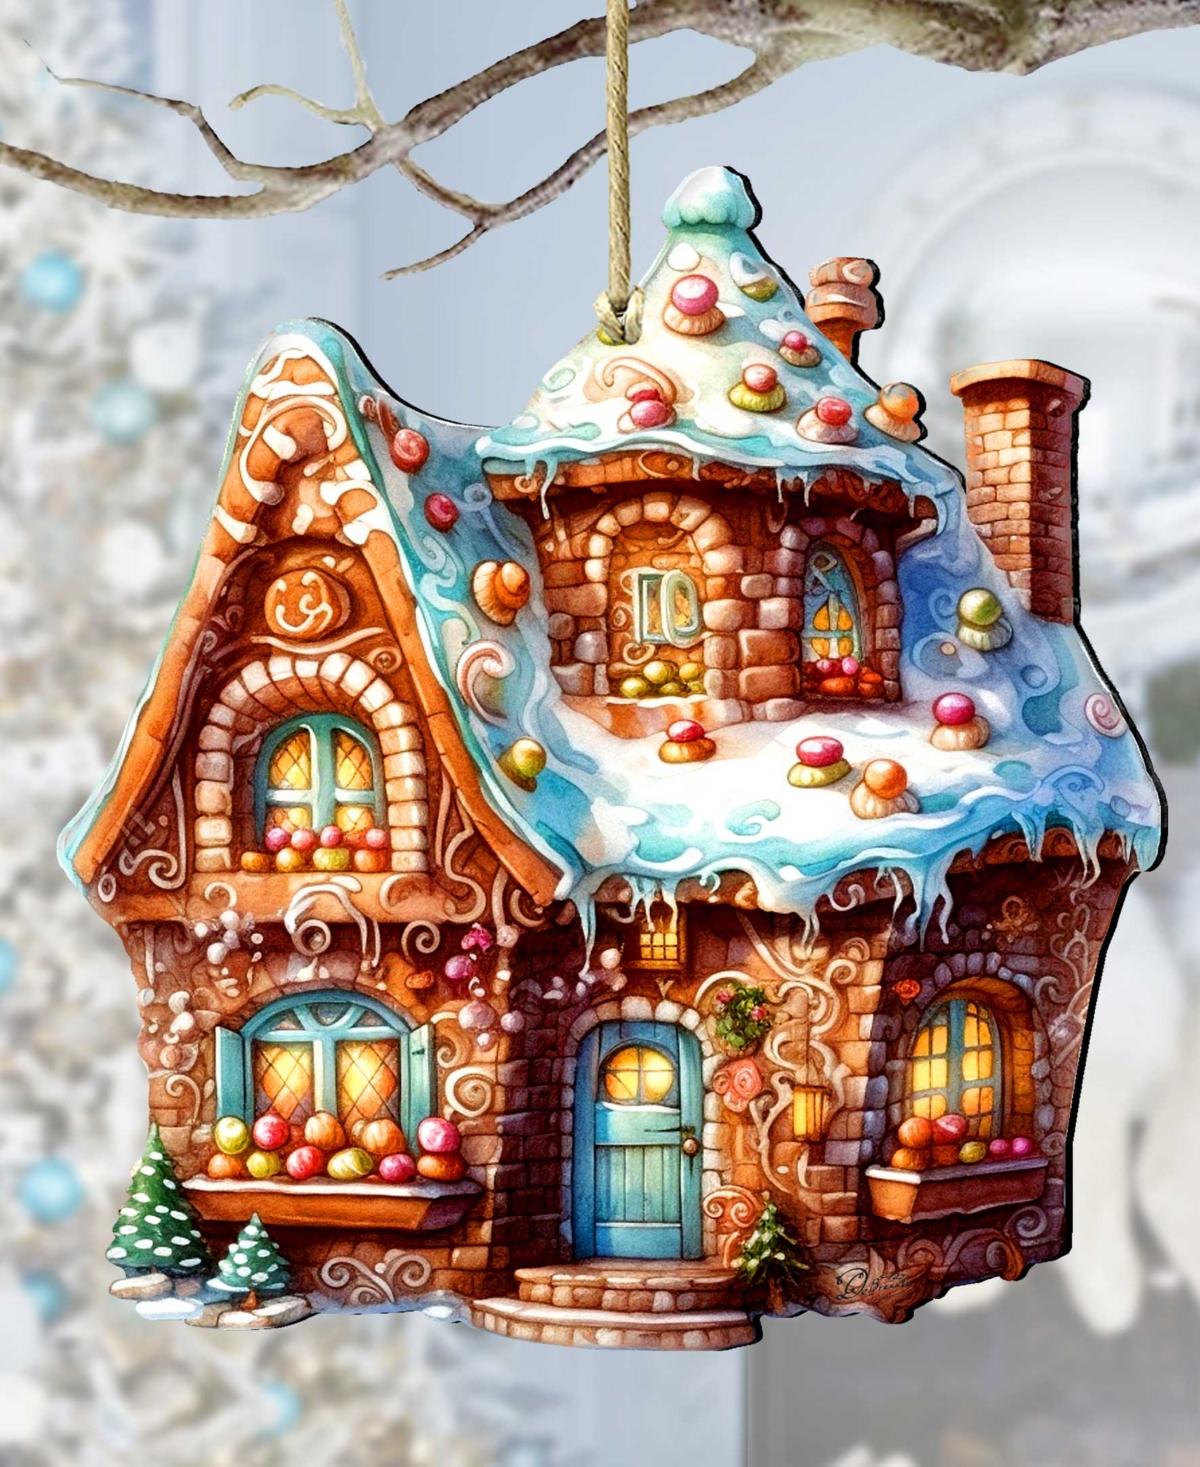 Designocracy Gingerbread House Christmas Wooden Ornaments Holiday Decor G. Debrekht In Multi Color